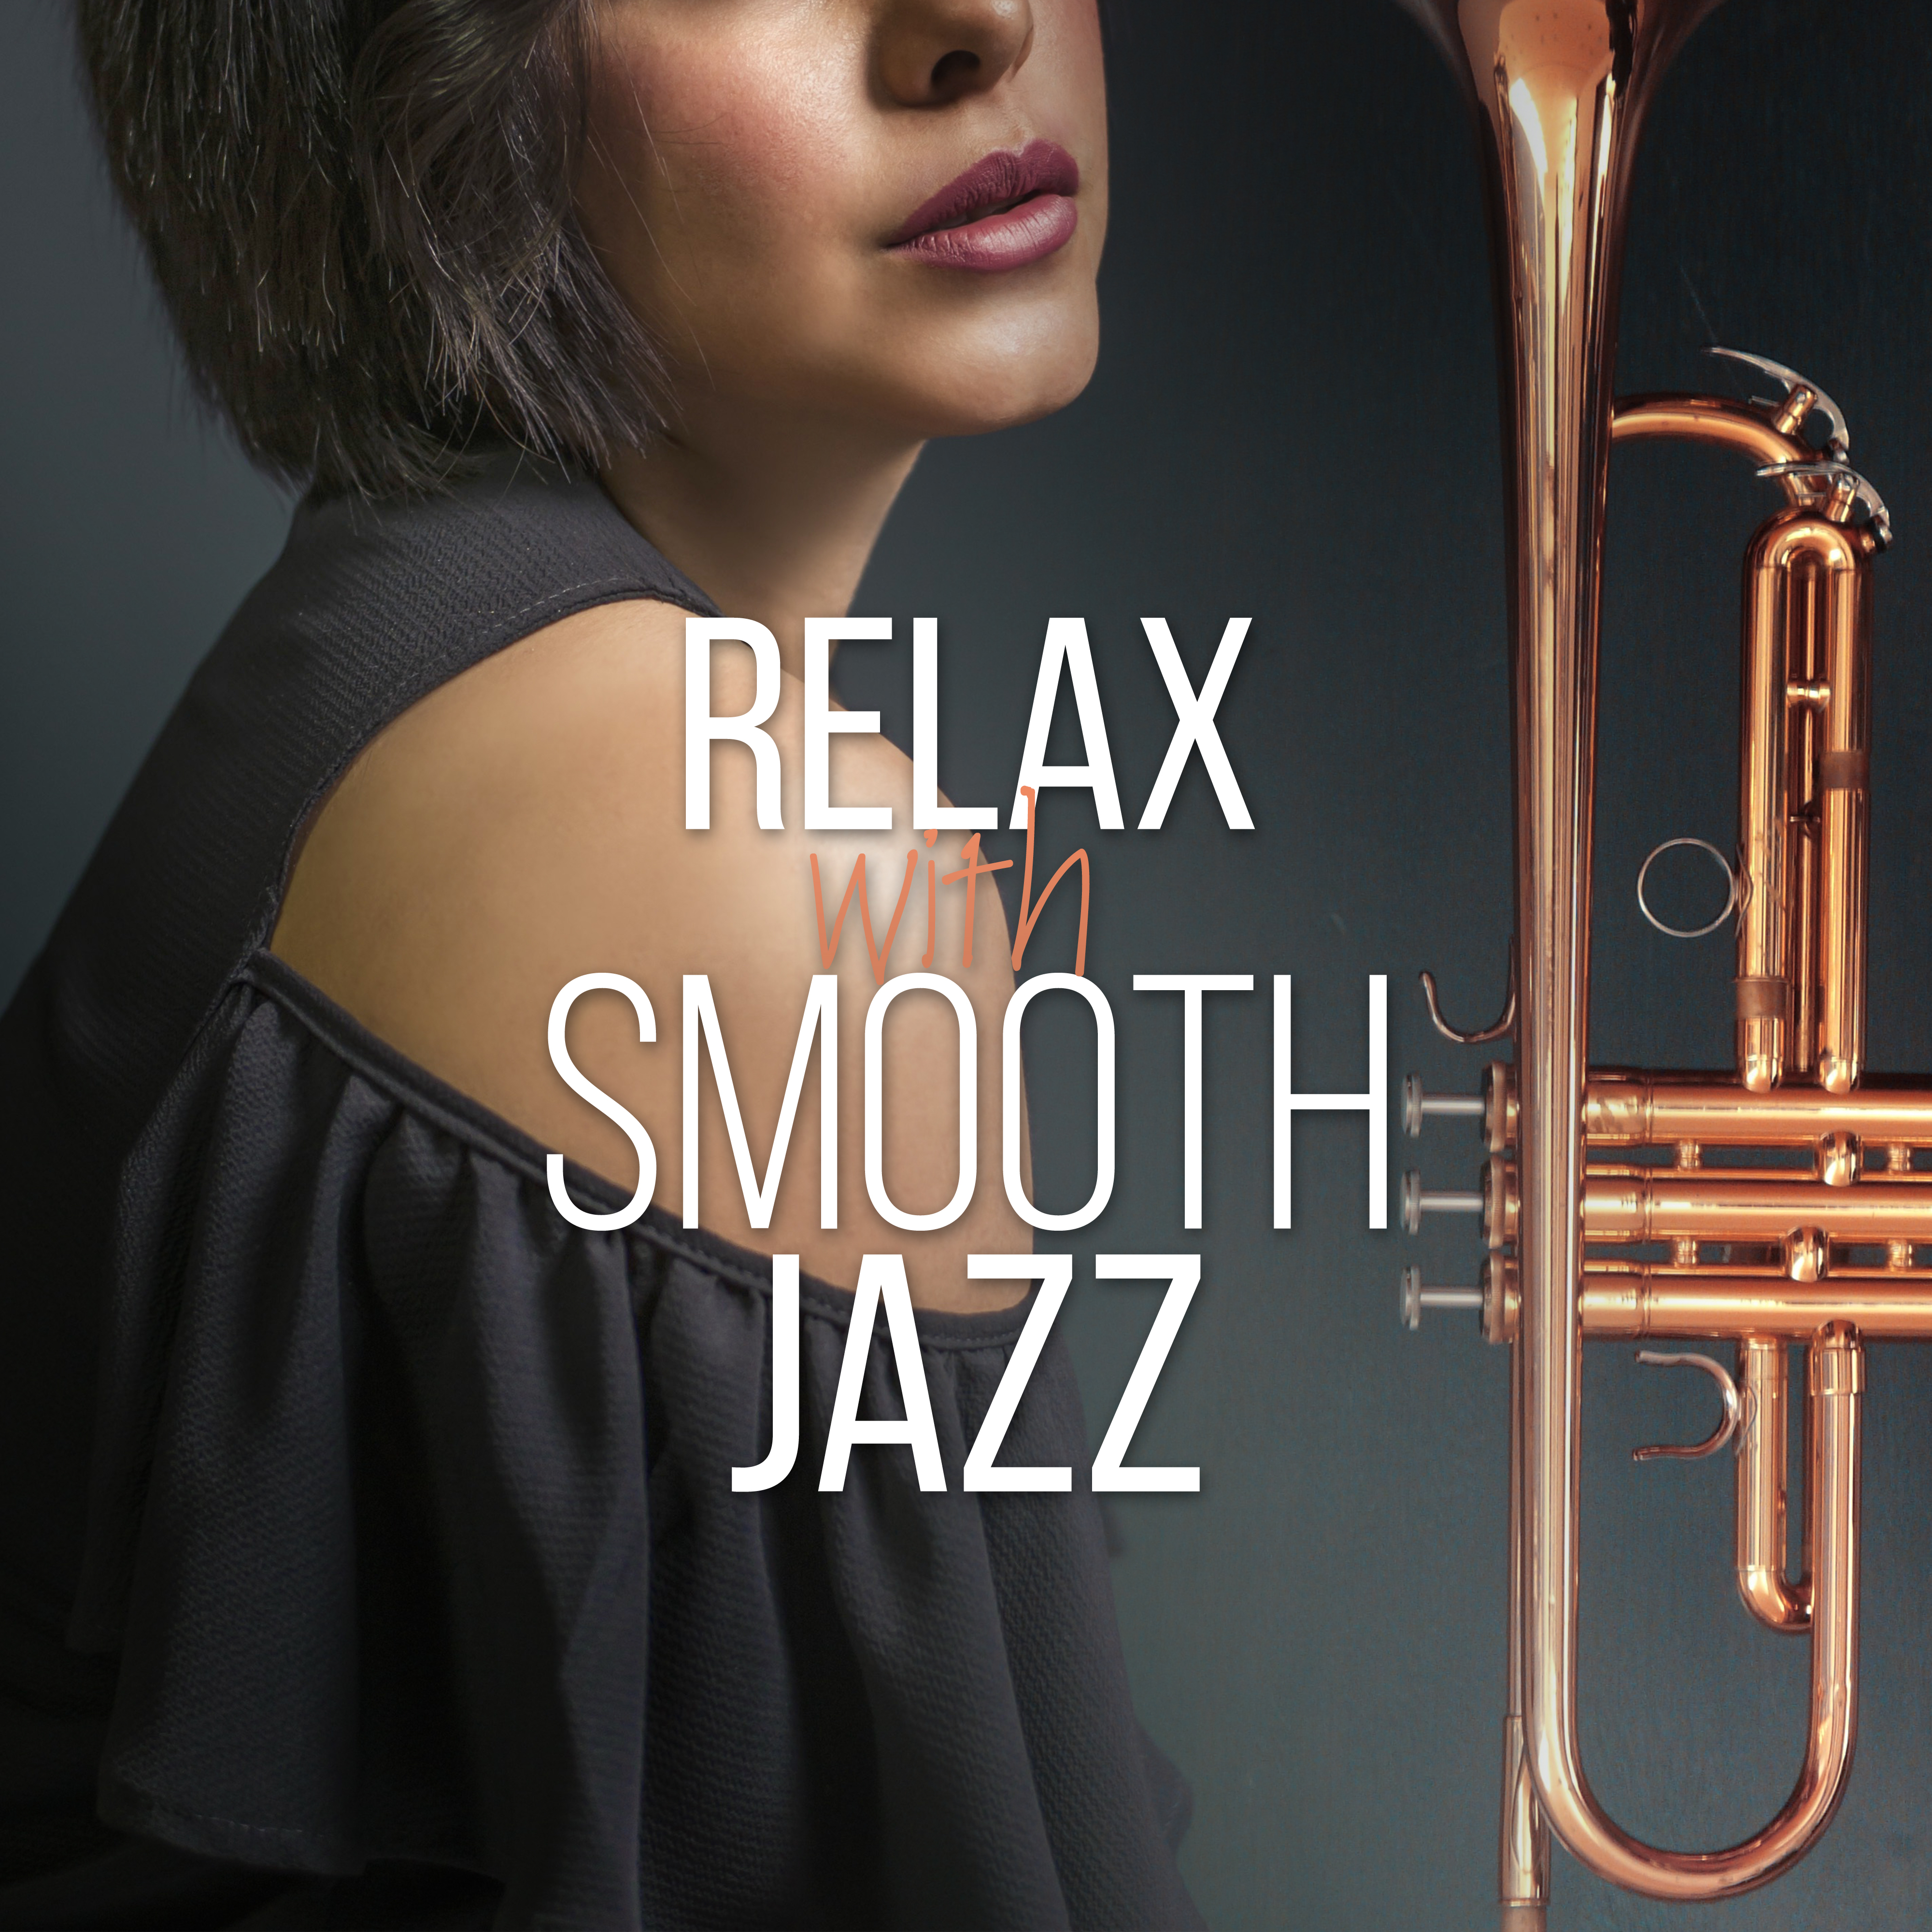 Relax with Smooth Jazz  Calm Down  Relax, Peaceful Jazz Sounds, Easy Listening